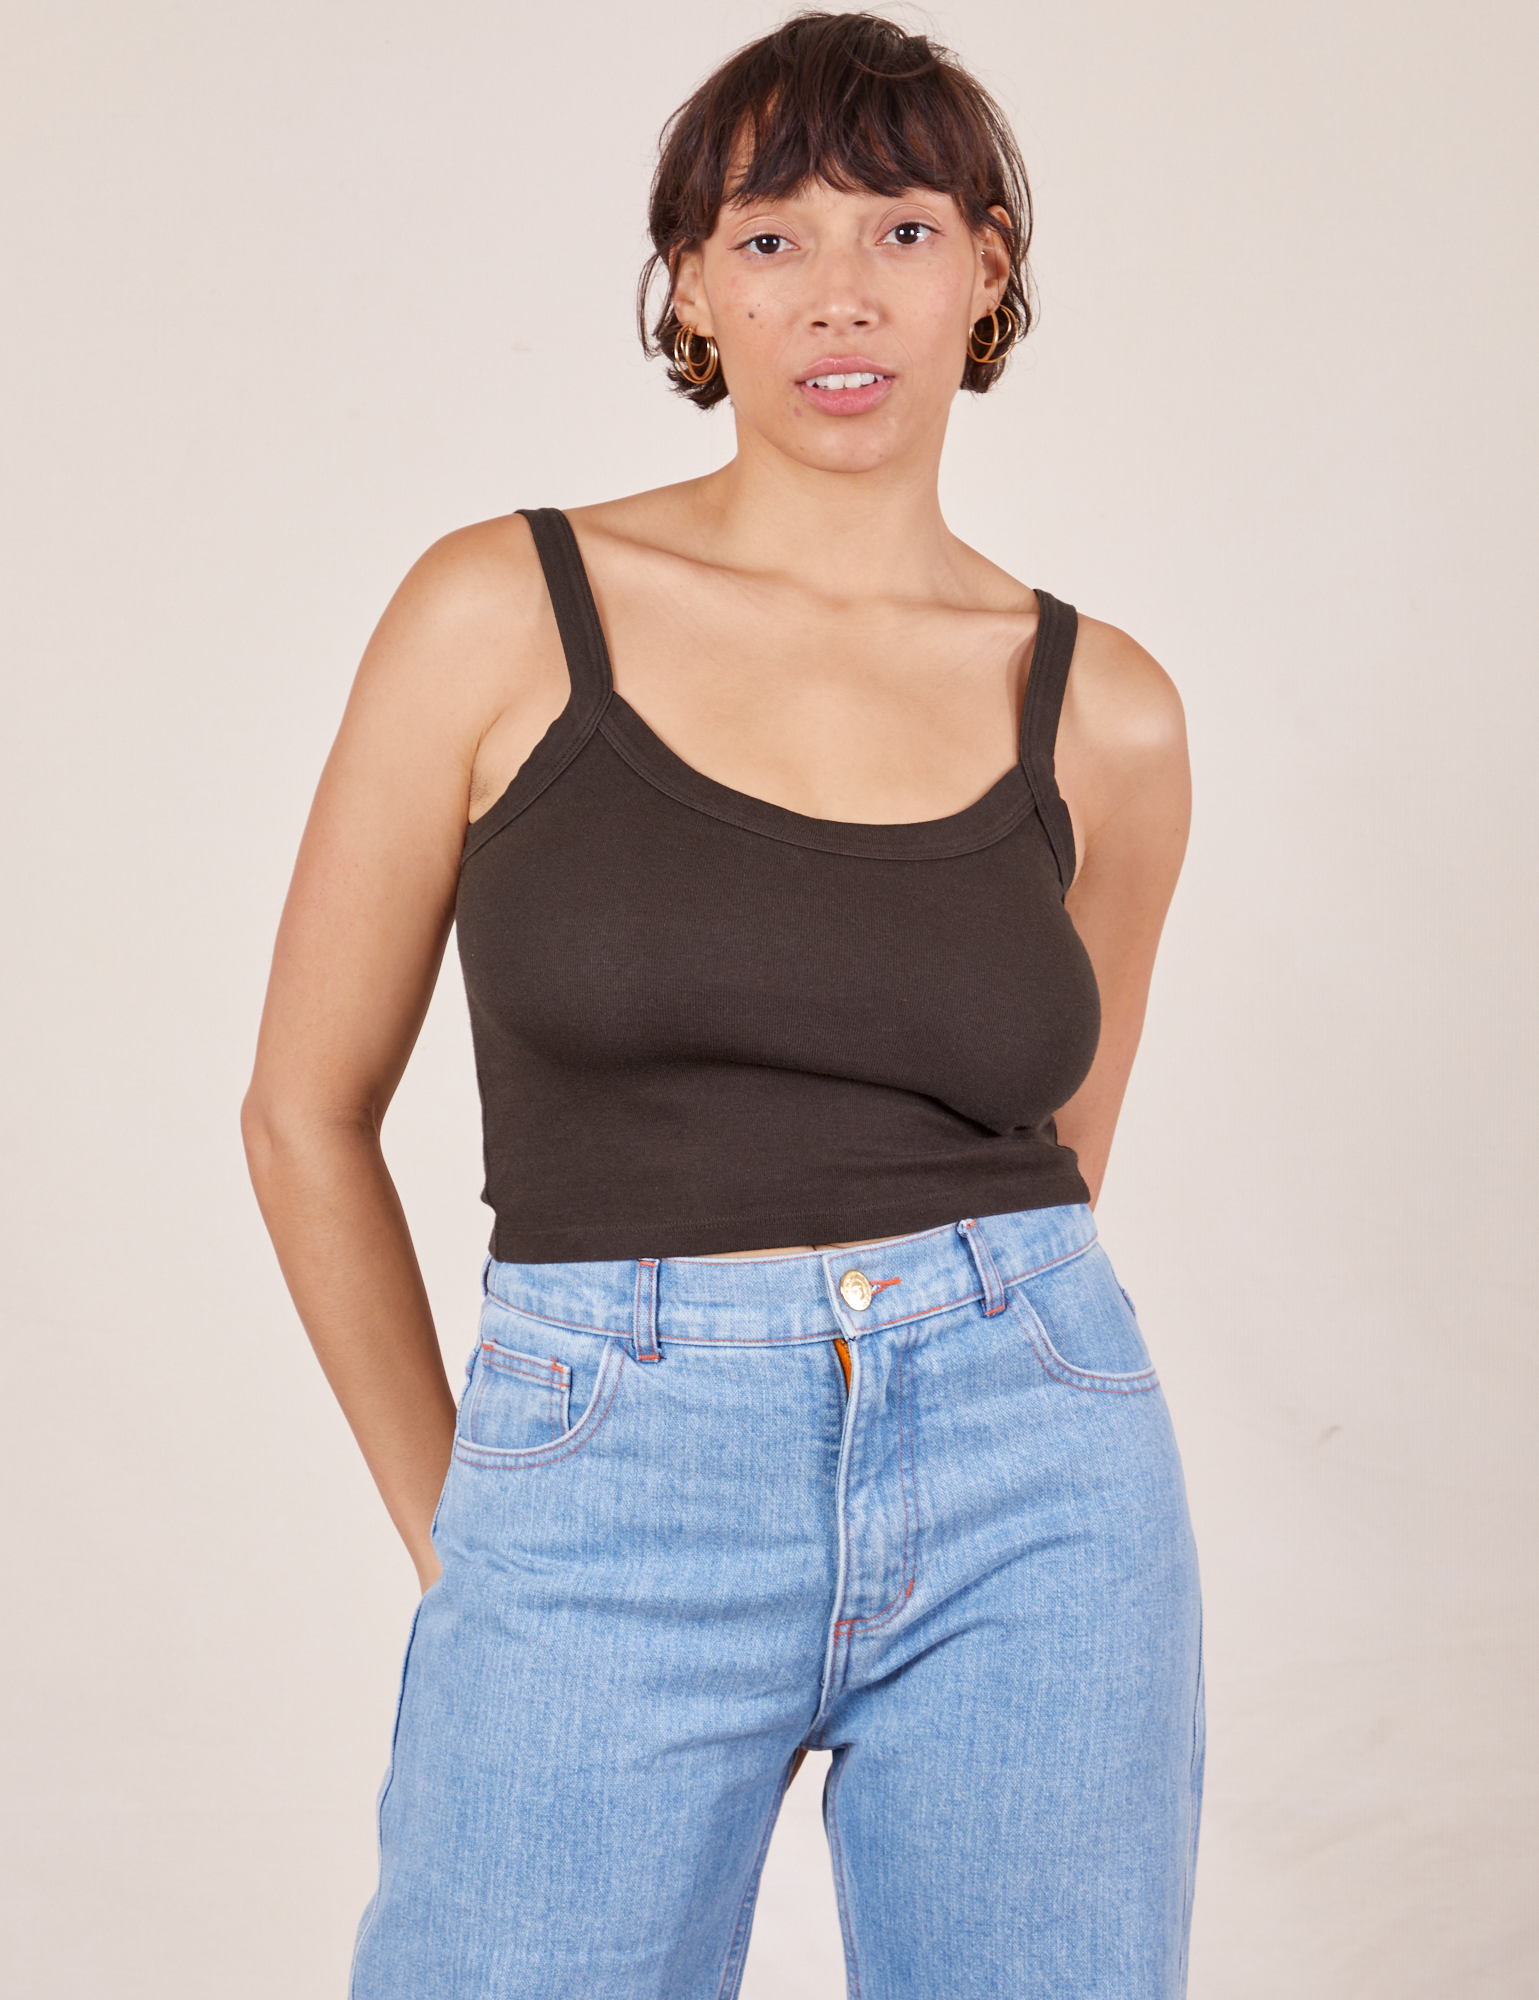 Tiara is 5&#39;4&quot; and wearing XS Cropped Cami in Espresso Brown paired with light wash Sailor Jeans